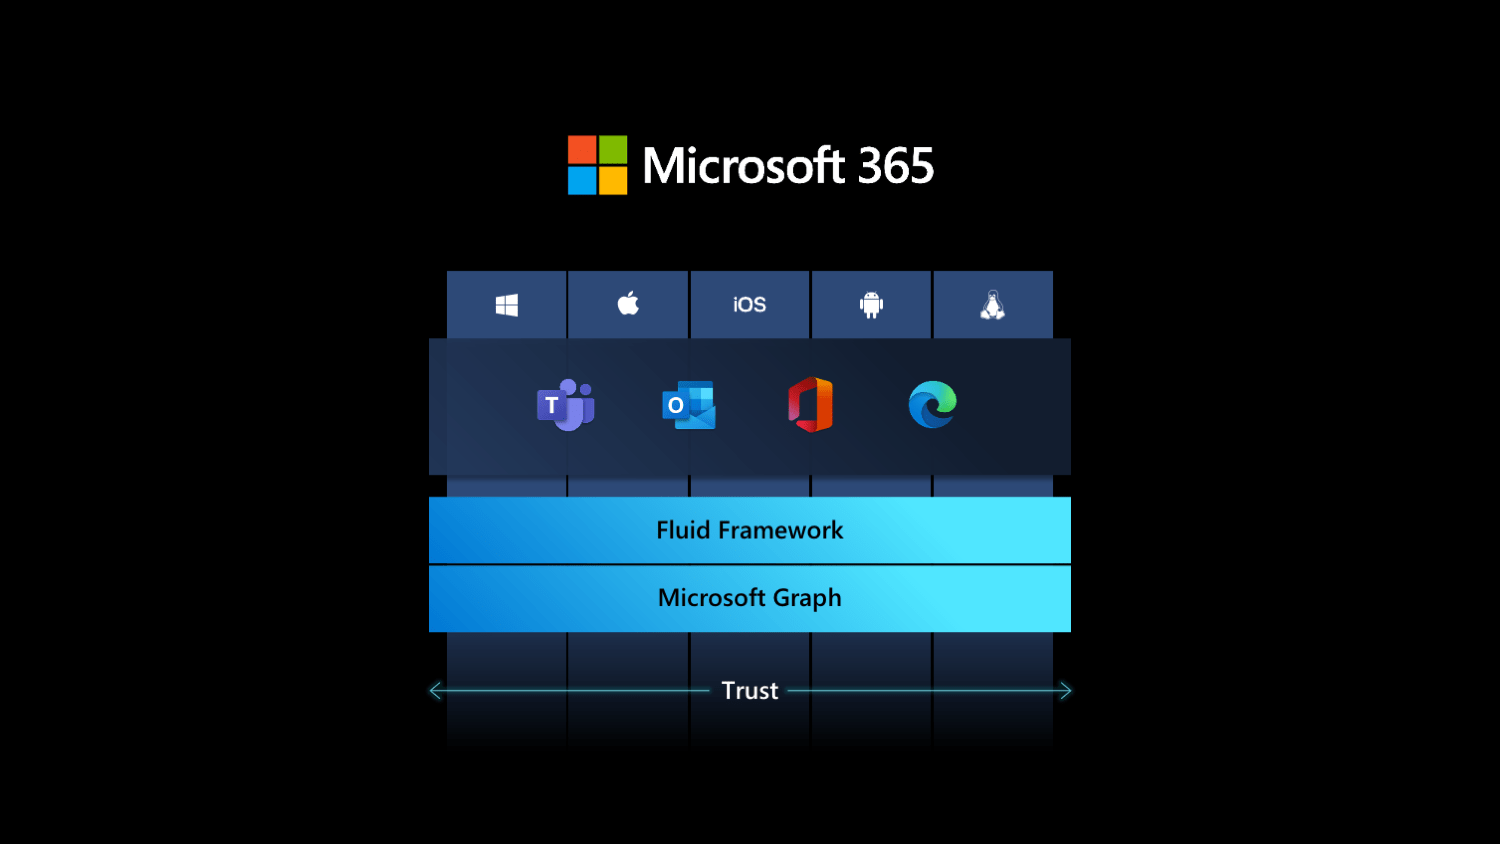 Microsoft 365 and its applications